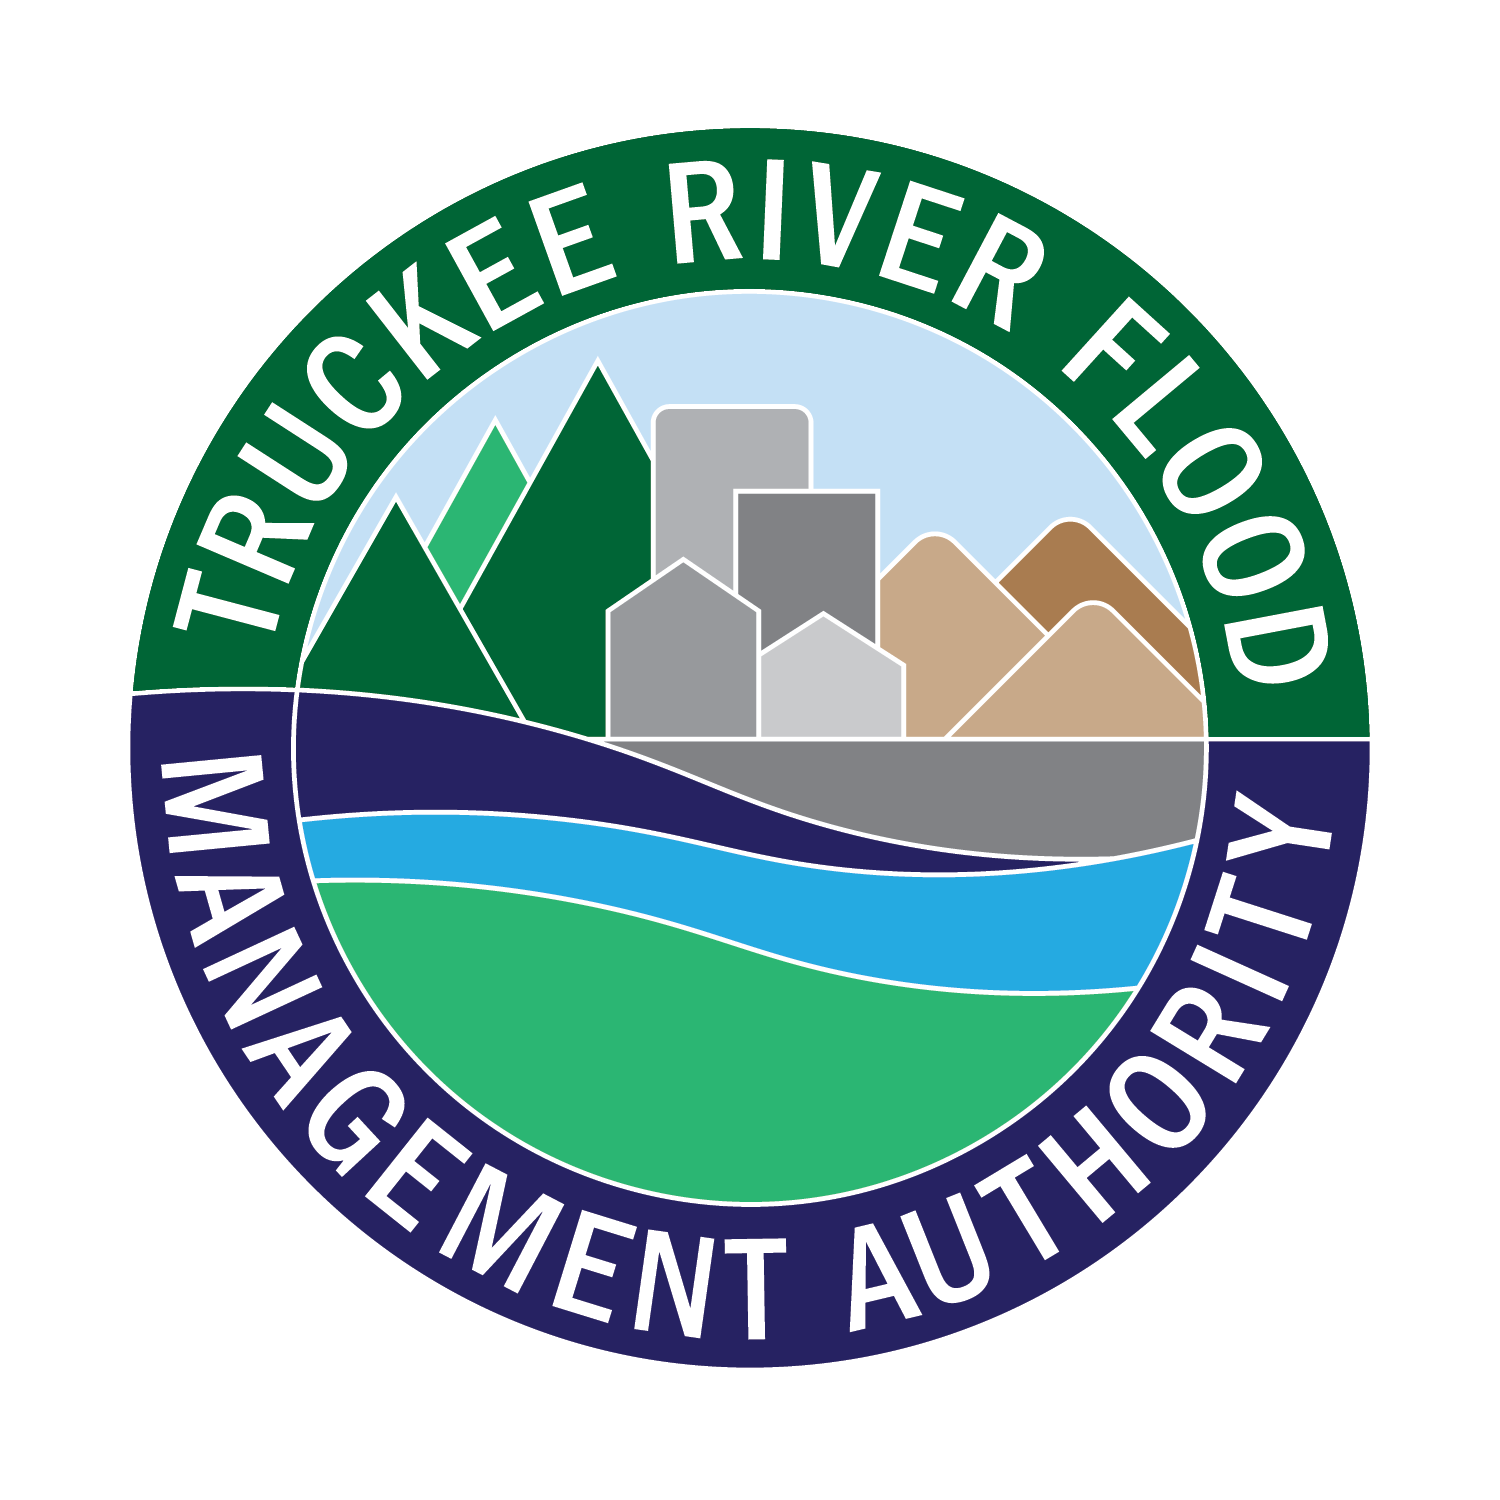 Assembly Bill No. 375 (AB 375) was signed into law on June 12, 2017, allowing the Truckee River Flood Management Authority to continue its mission to plan